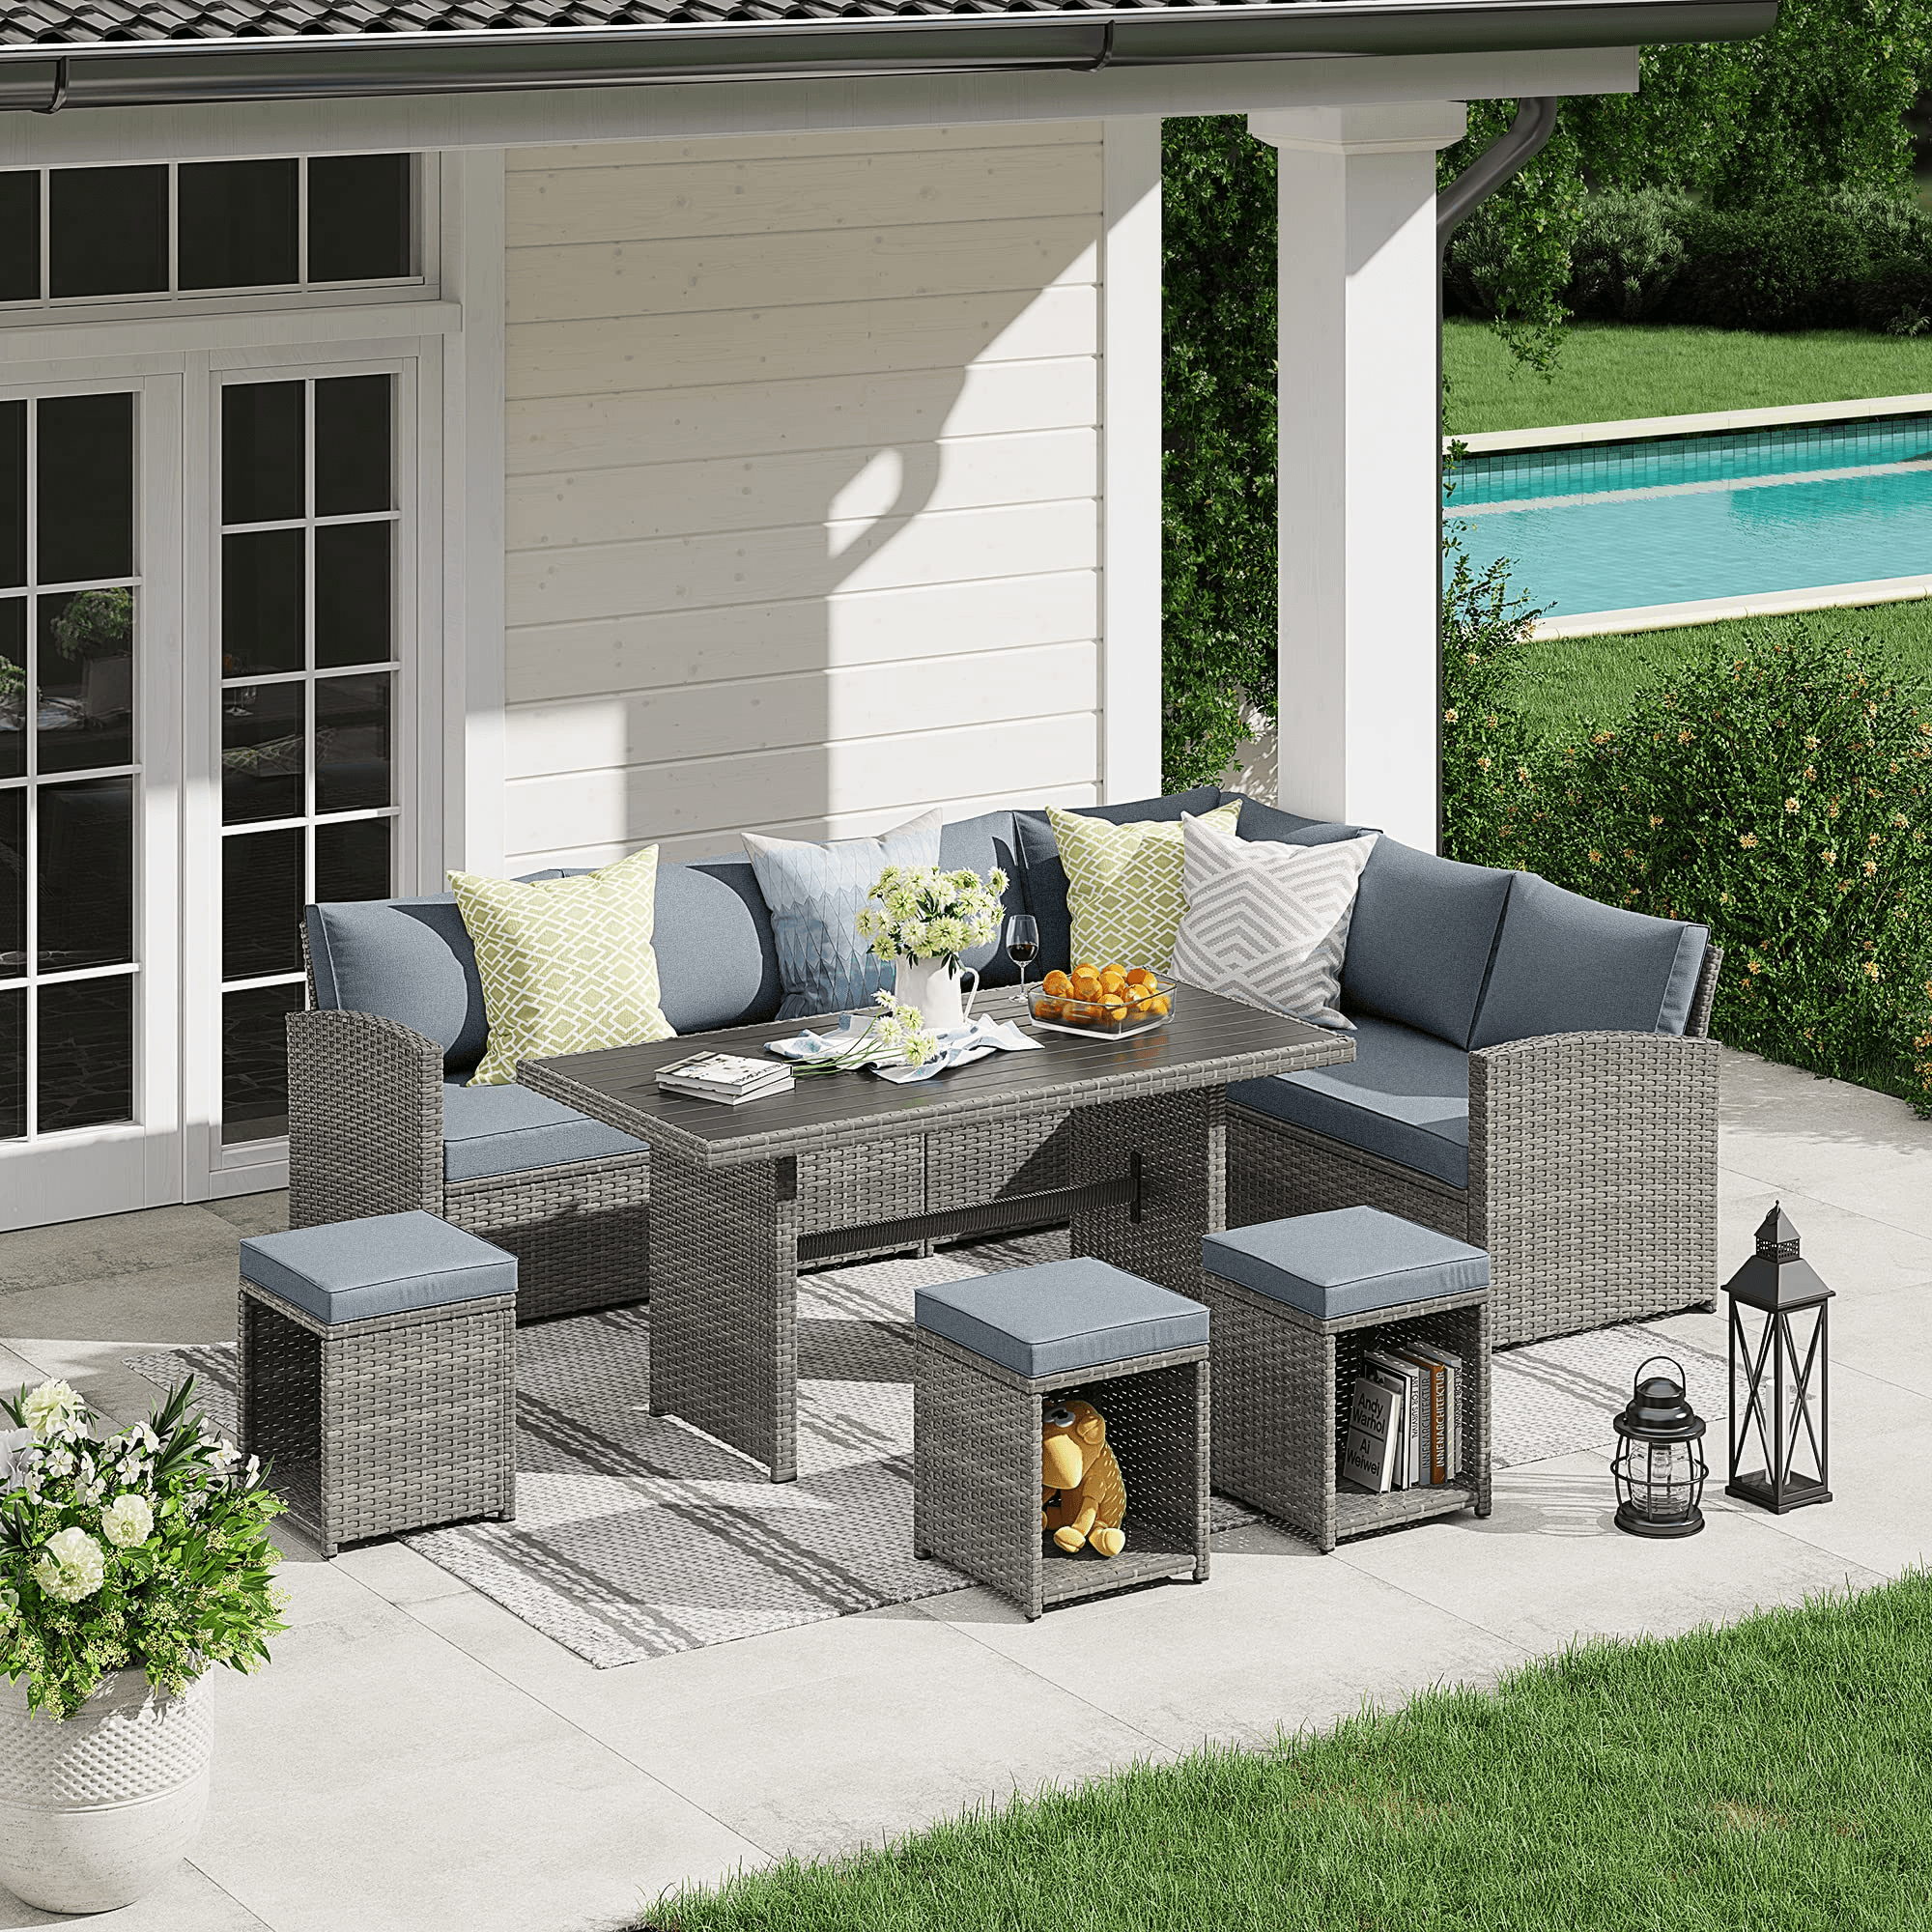 Yangming Outdoor Patio Furniture Set, 7 Piece Sectional Clearance Sets  Dining Table Rattan Chairs Wicker Couch Conversation Seating Sofa with  Ottomans